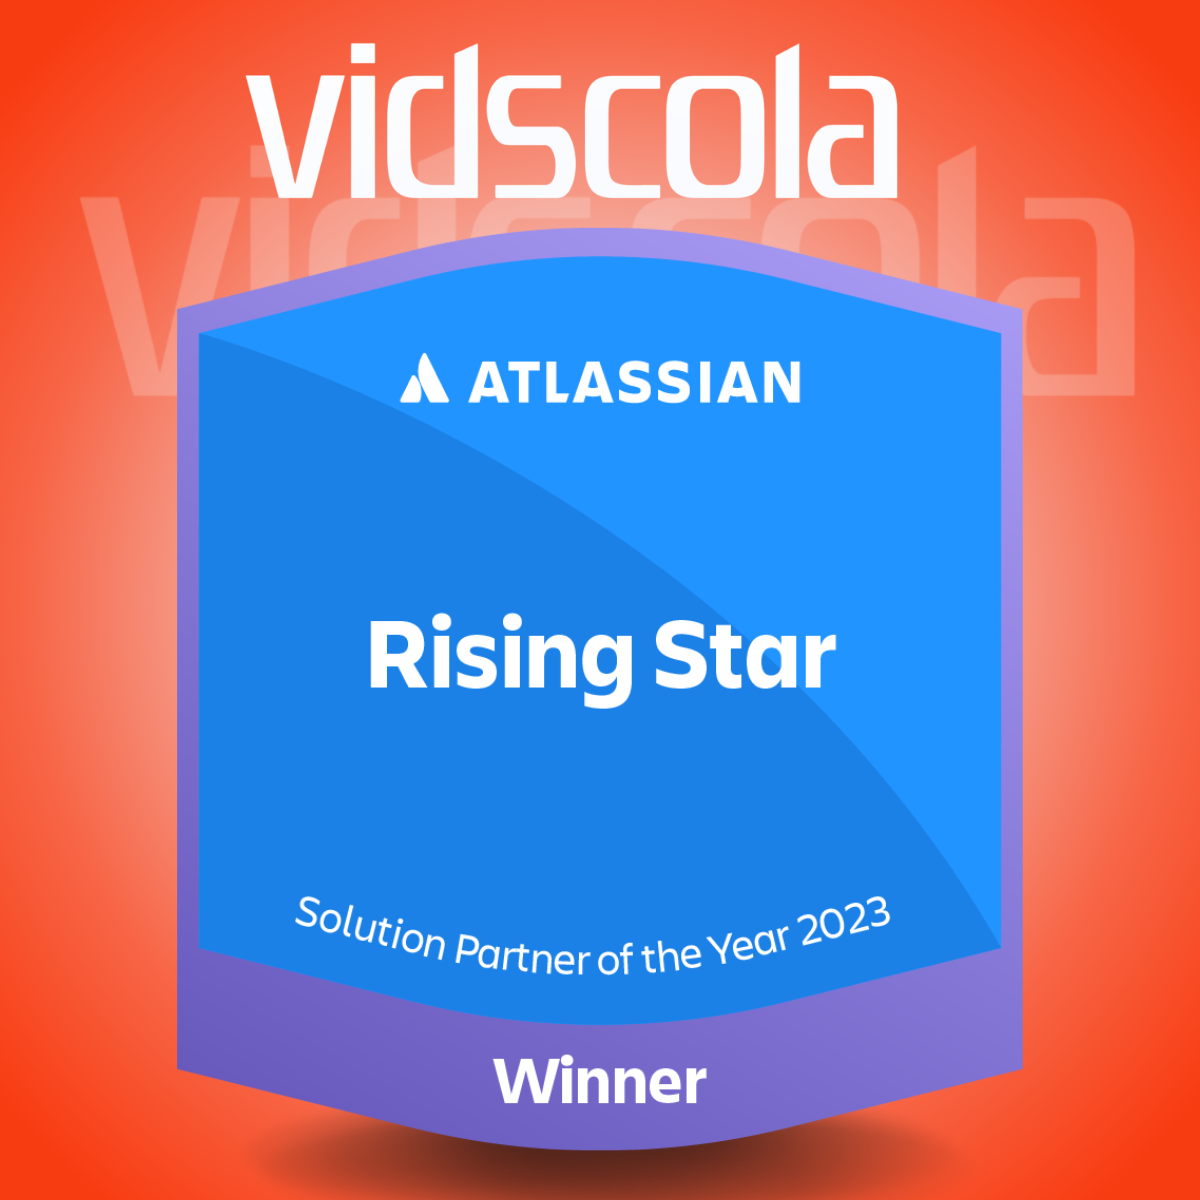 Vidscola Received Atlassian Partner of the Year 2023 Rising Star